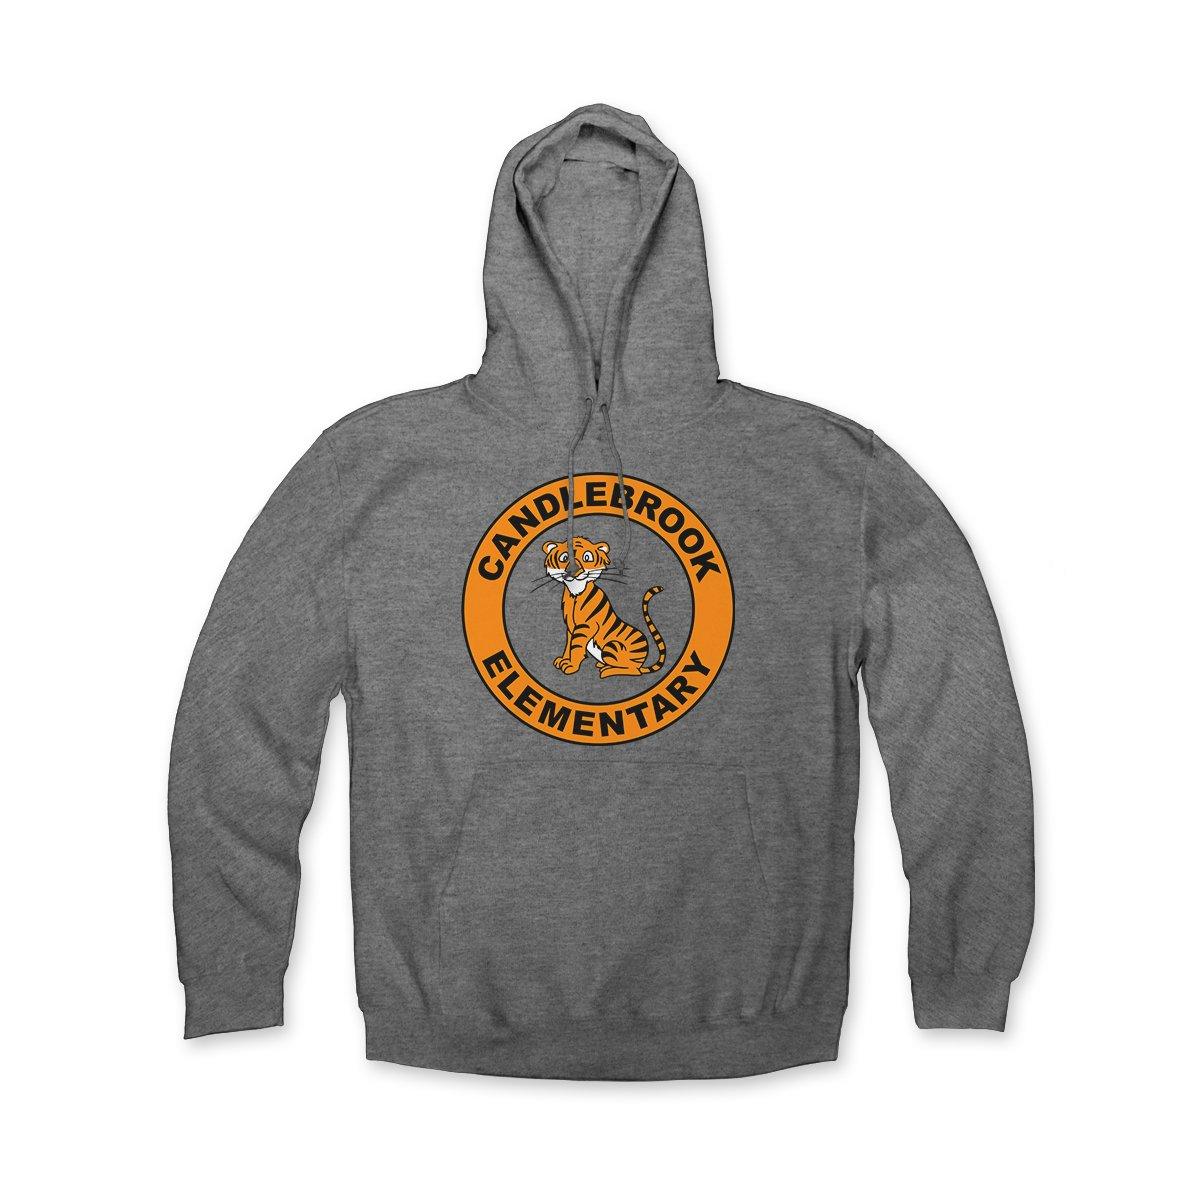 Buy Now – Candlebrook Elementary School "Cub" Hoodie – Philly & Sports Merch – Cracked Bell